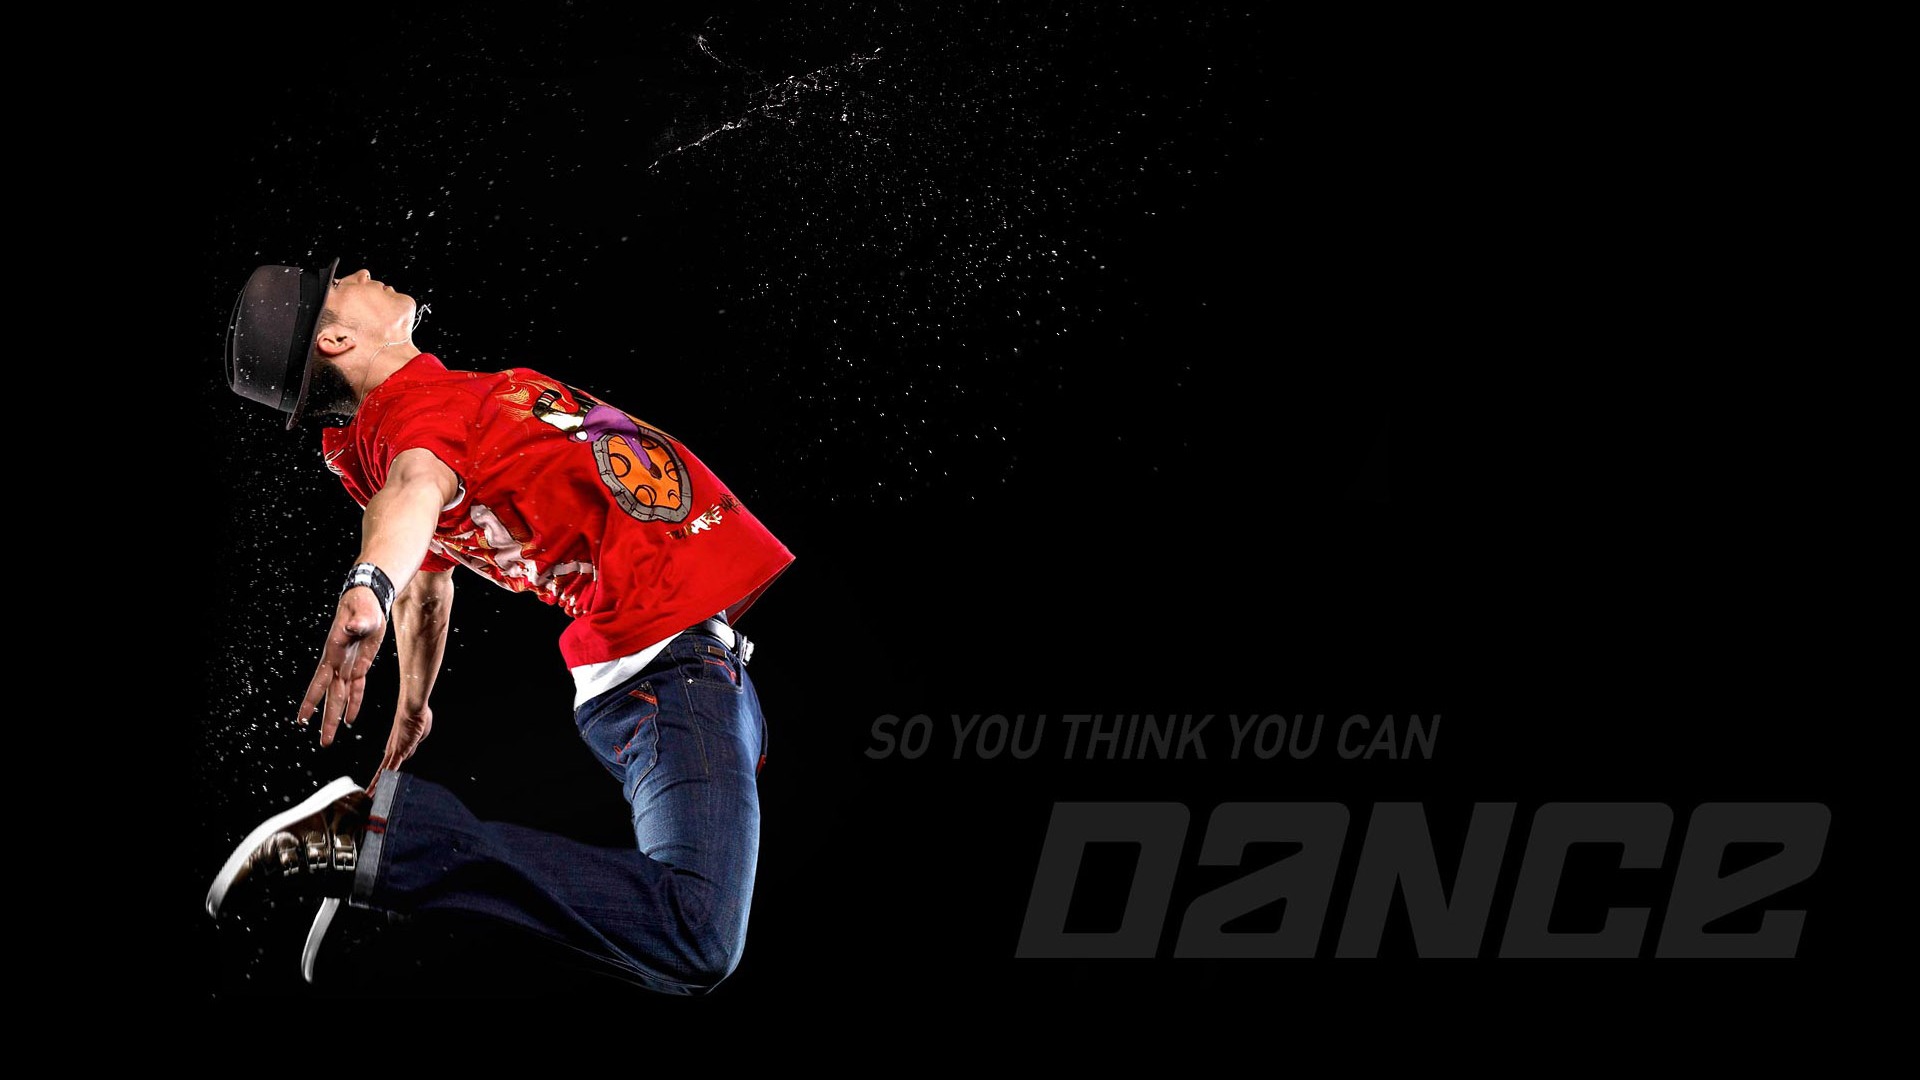 So You Think You Can Dance 舞林争霸 壁纸(一)6 - 1920x1080